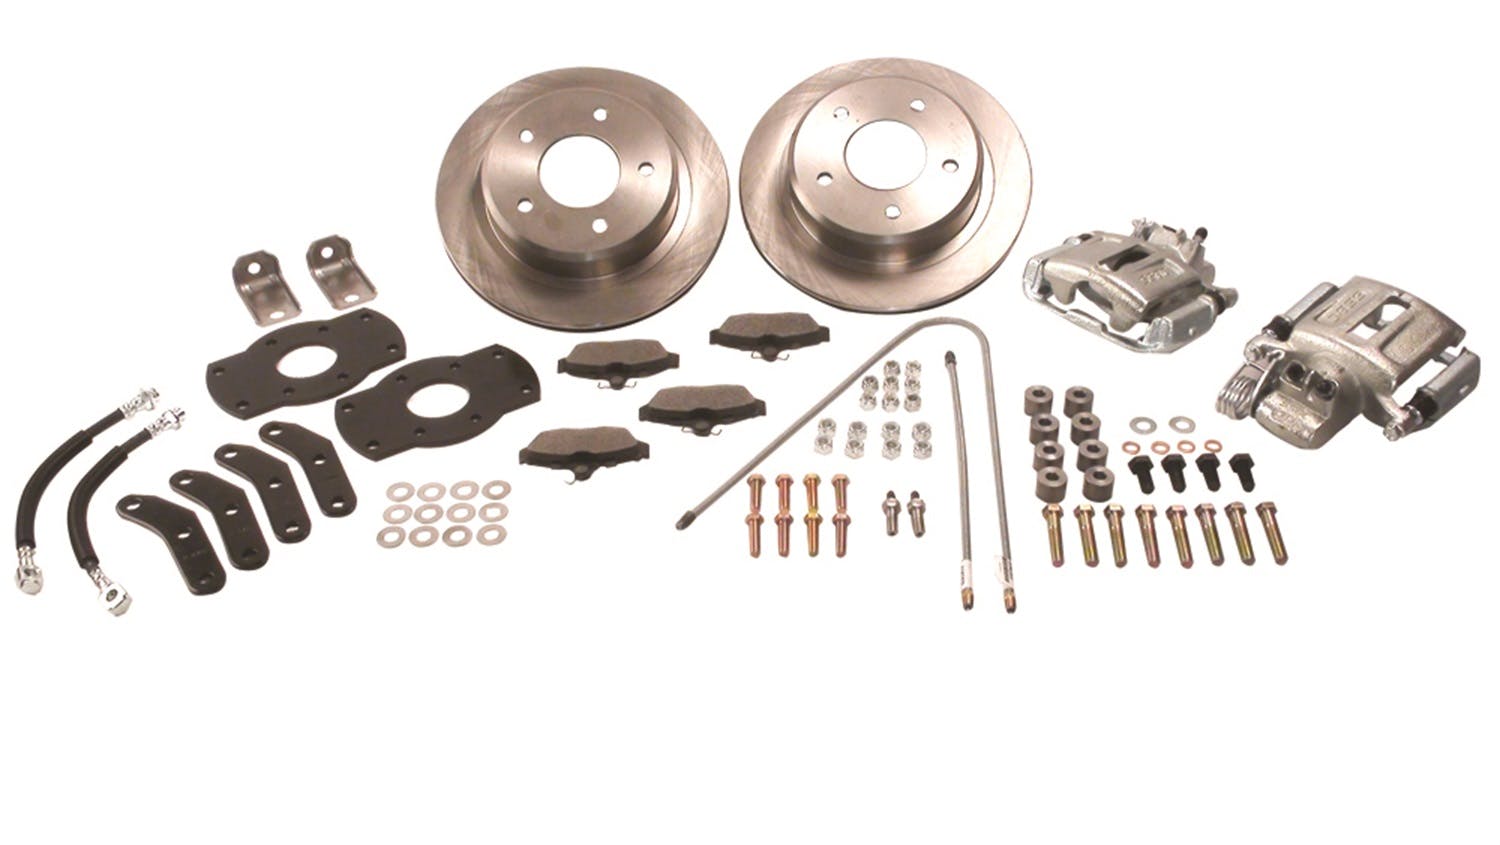 Stainless Steel Brakes A128-6BK Kit A128-6 w/black calipers